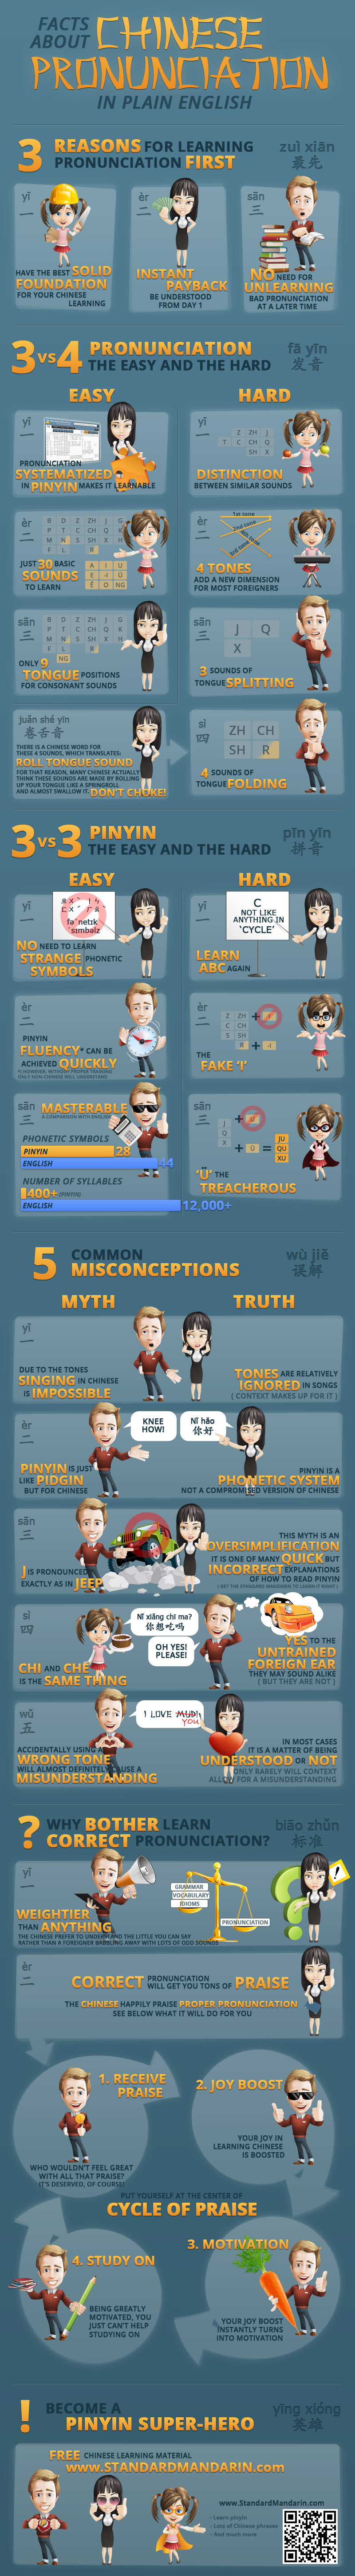 Facts About Chinese Pronunciation and Pinyin Infographic